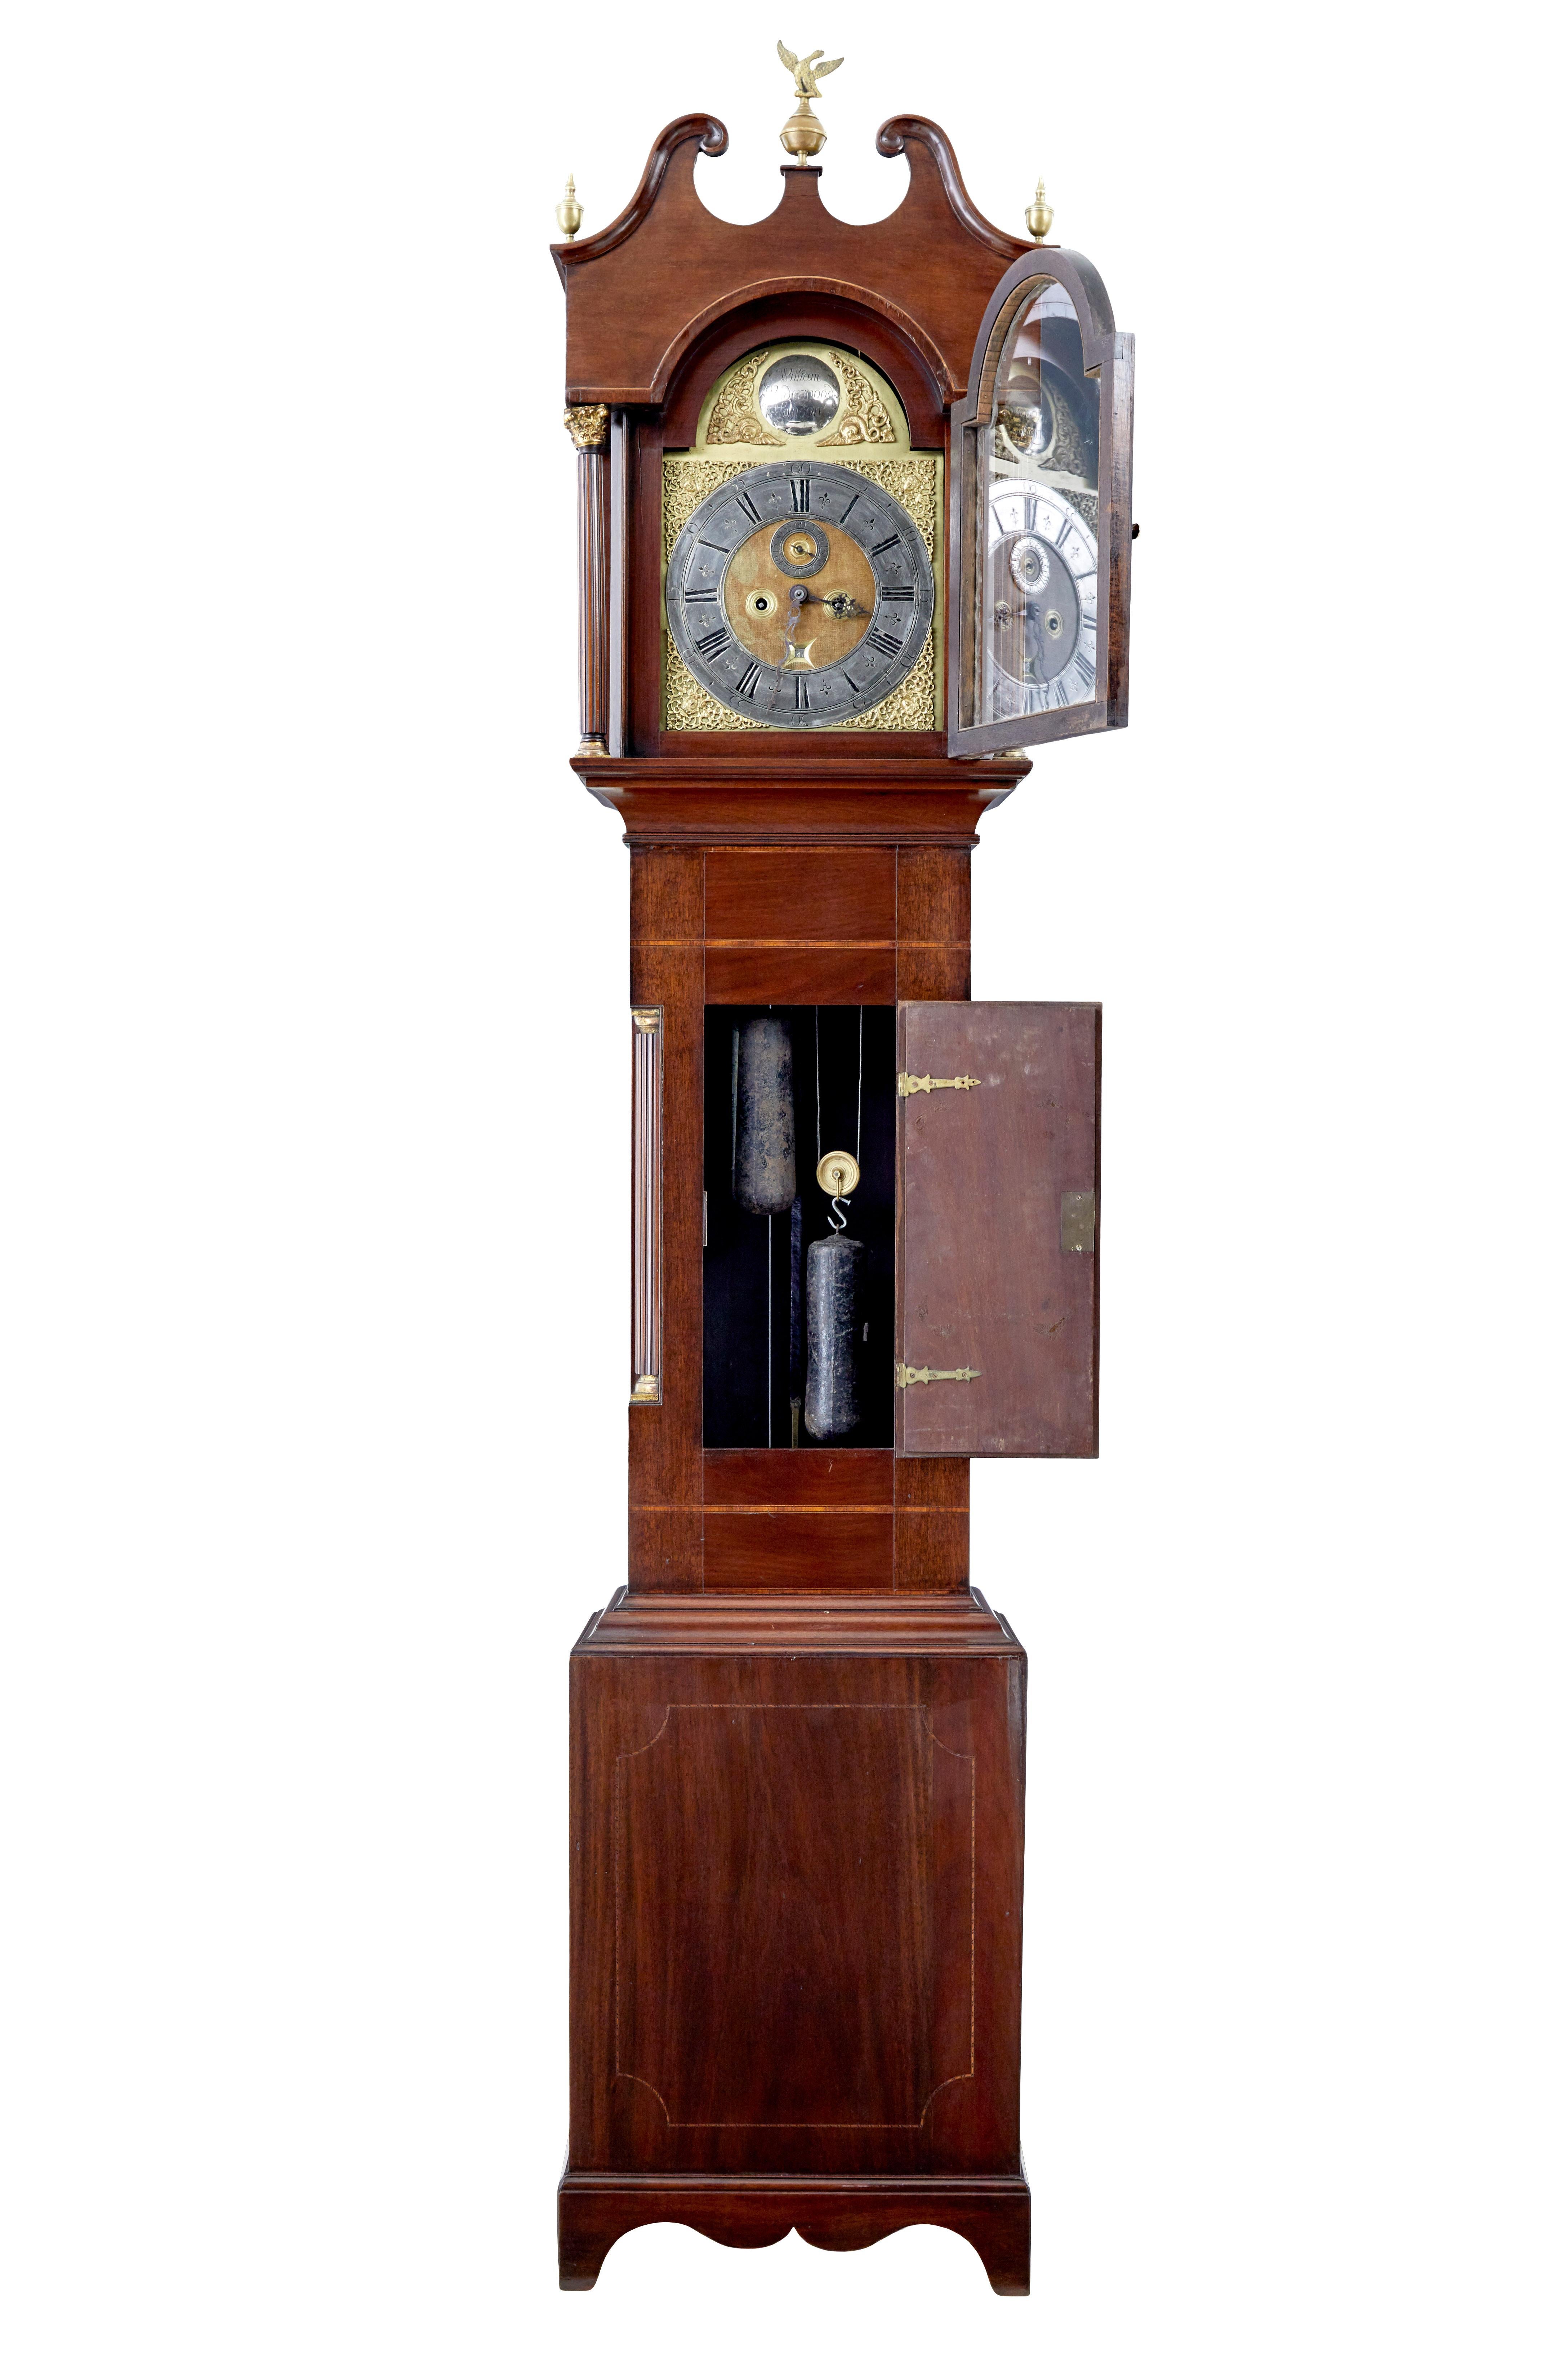 18th century inlaid mahogany long case clock by william underwood of london circa 1760.

Excellent quality clock by renowned London maker William Underwood circa 1760. Second hand dial and date. Original wind on arm. Stringing all round outer edge,